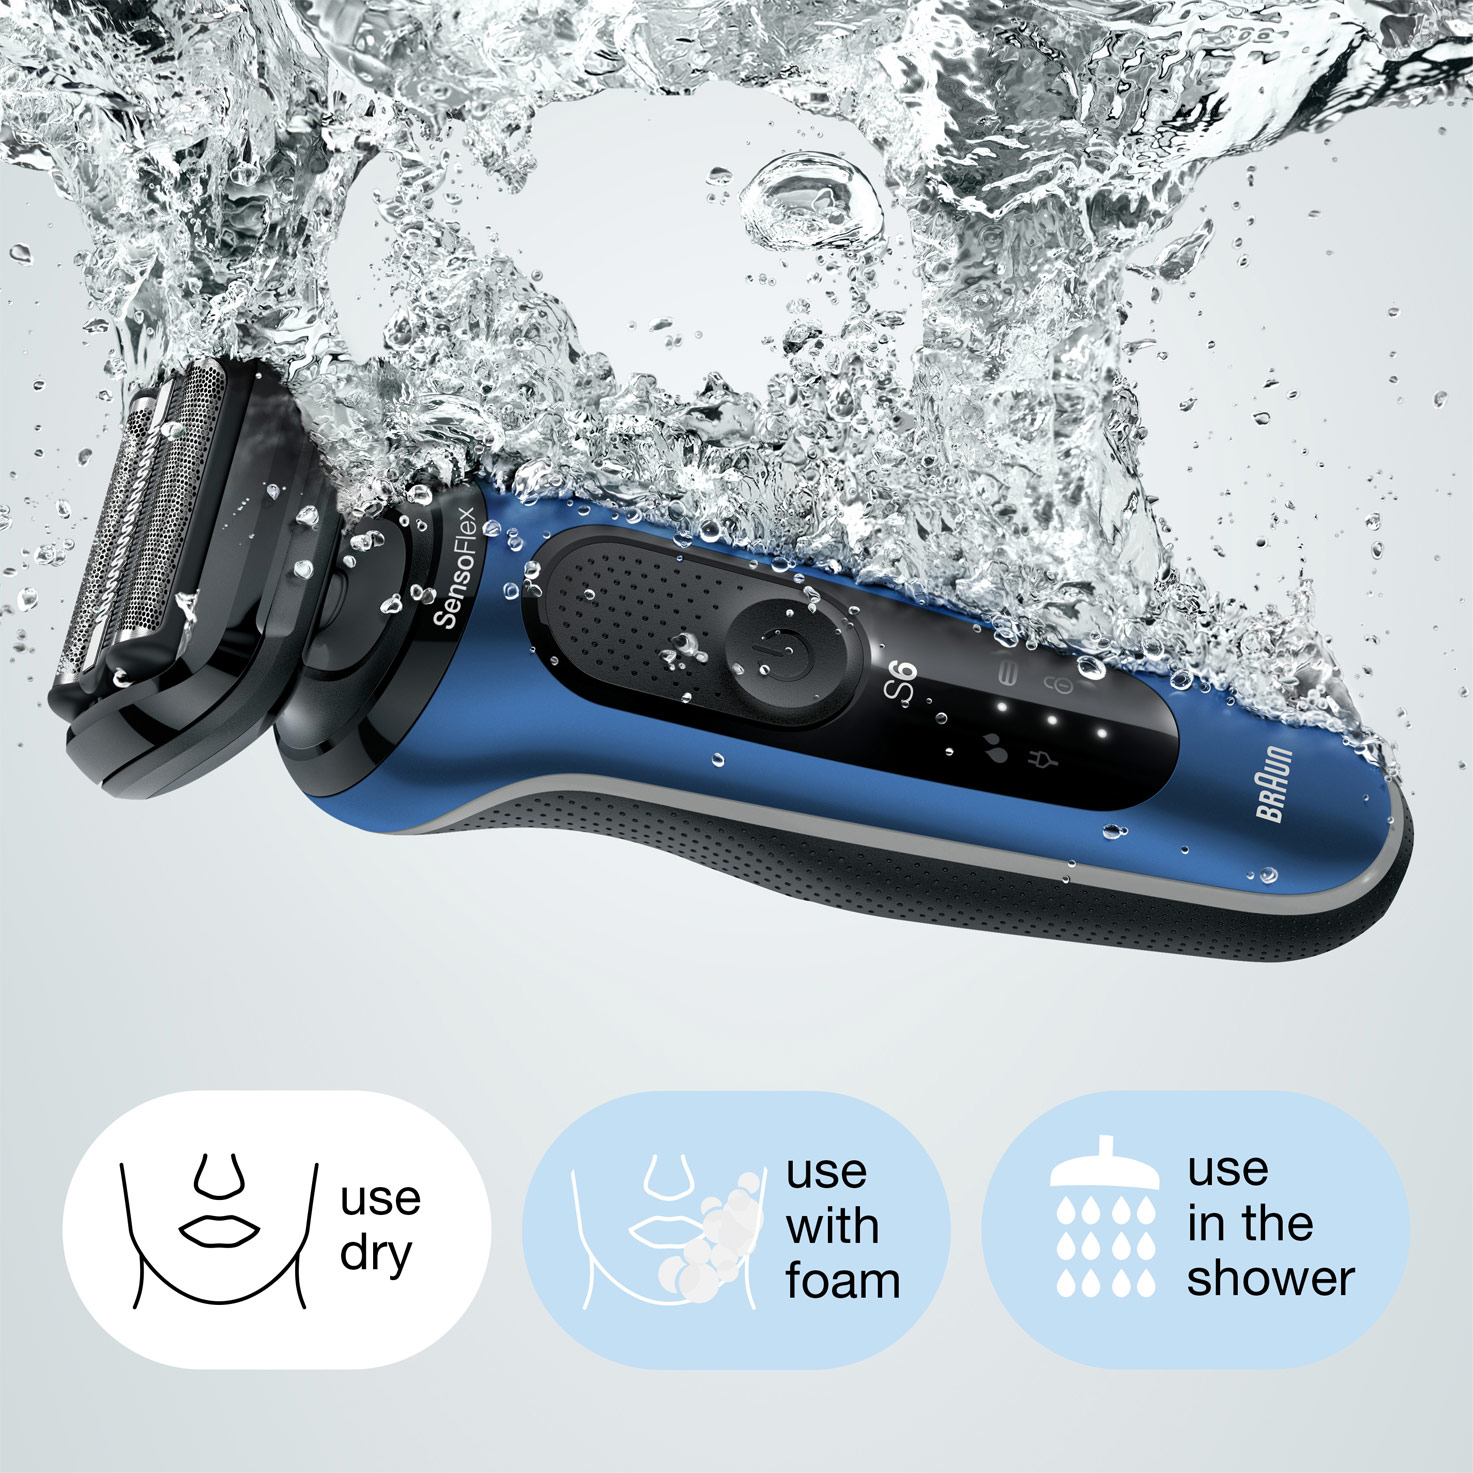 travel | case and & 6 Braun 61-B1500s attachment, 1 Dry Series Wet blue. shaver with SG